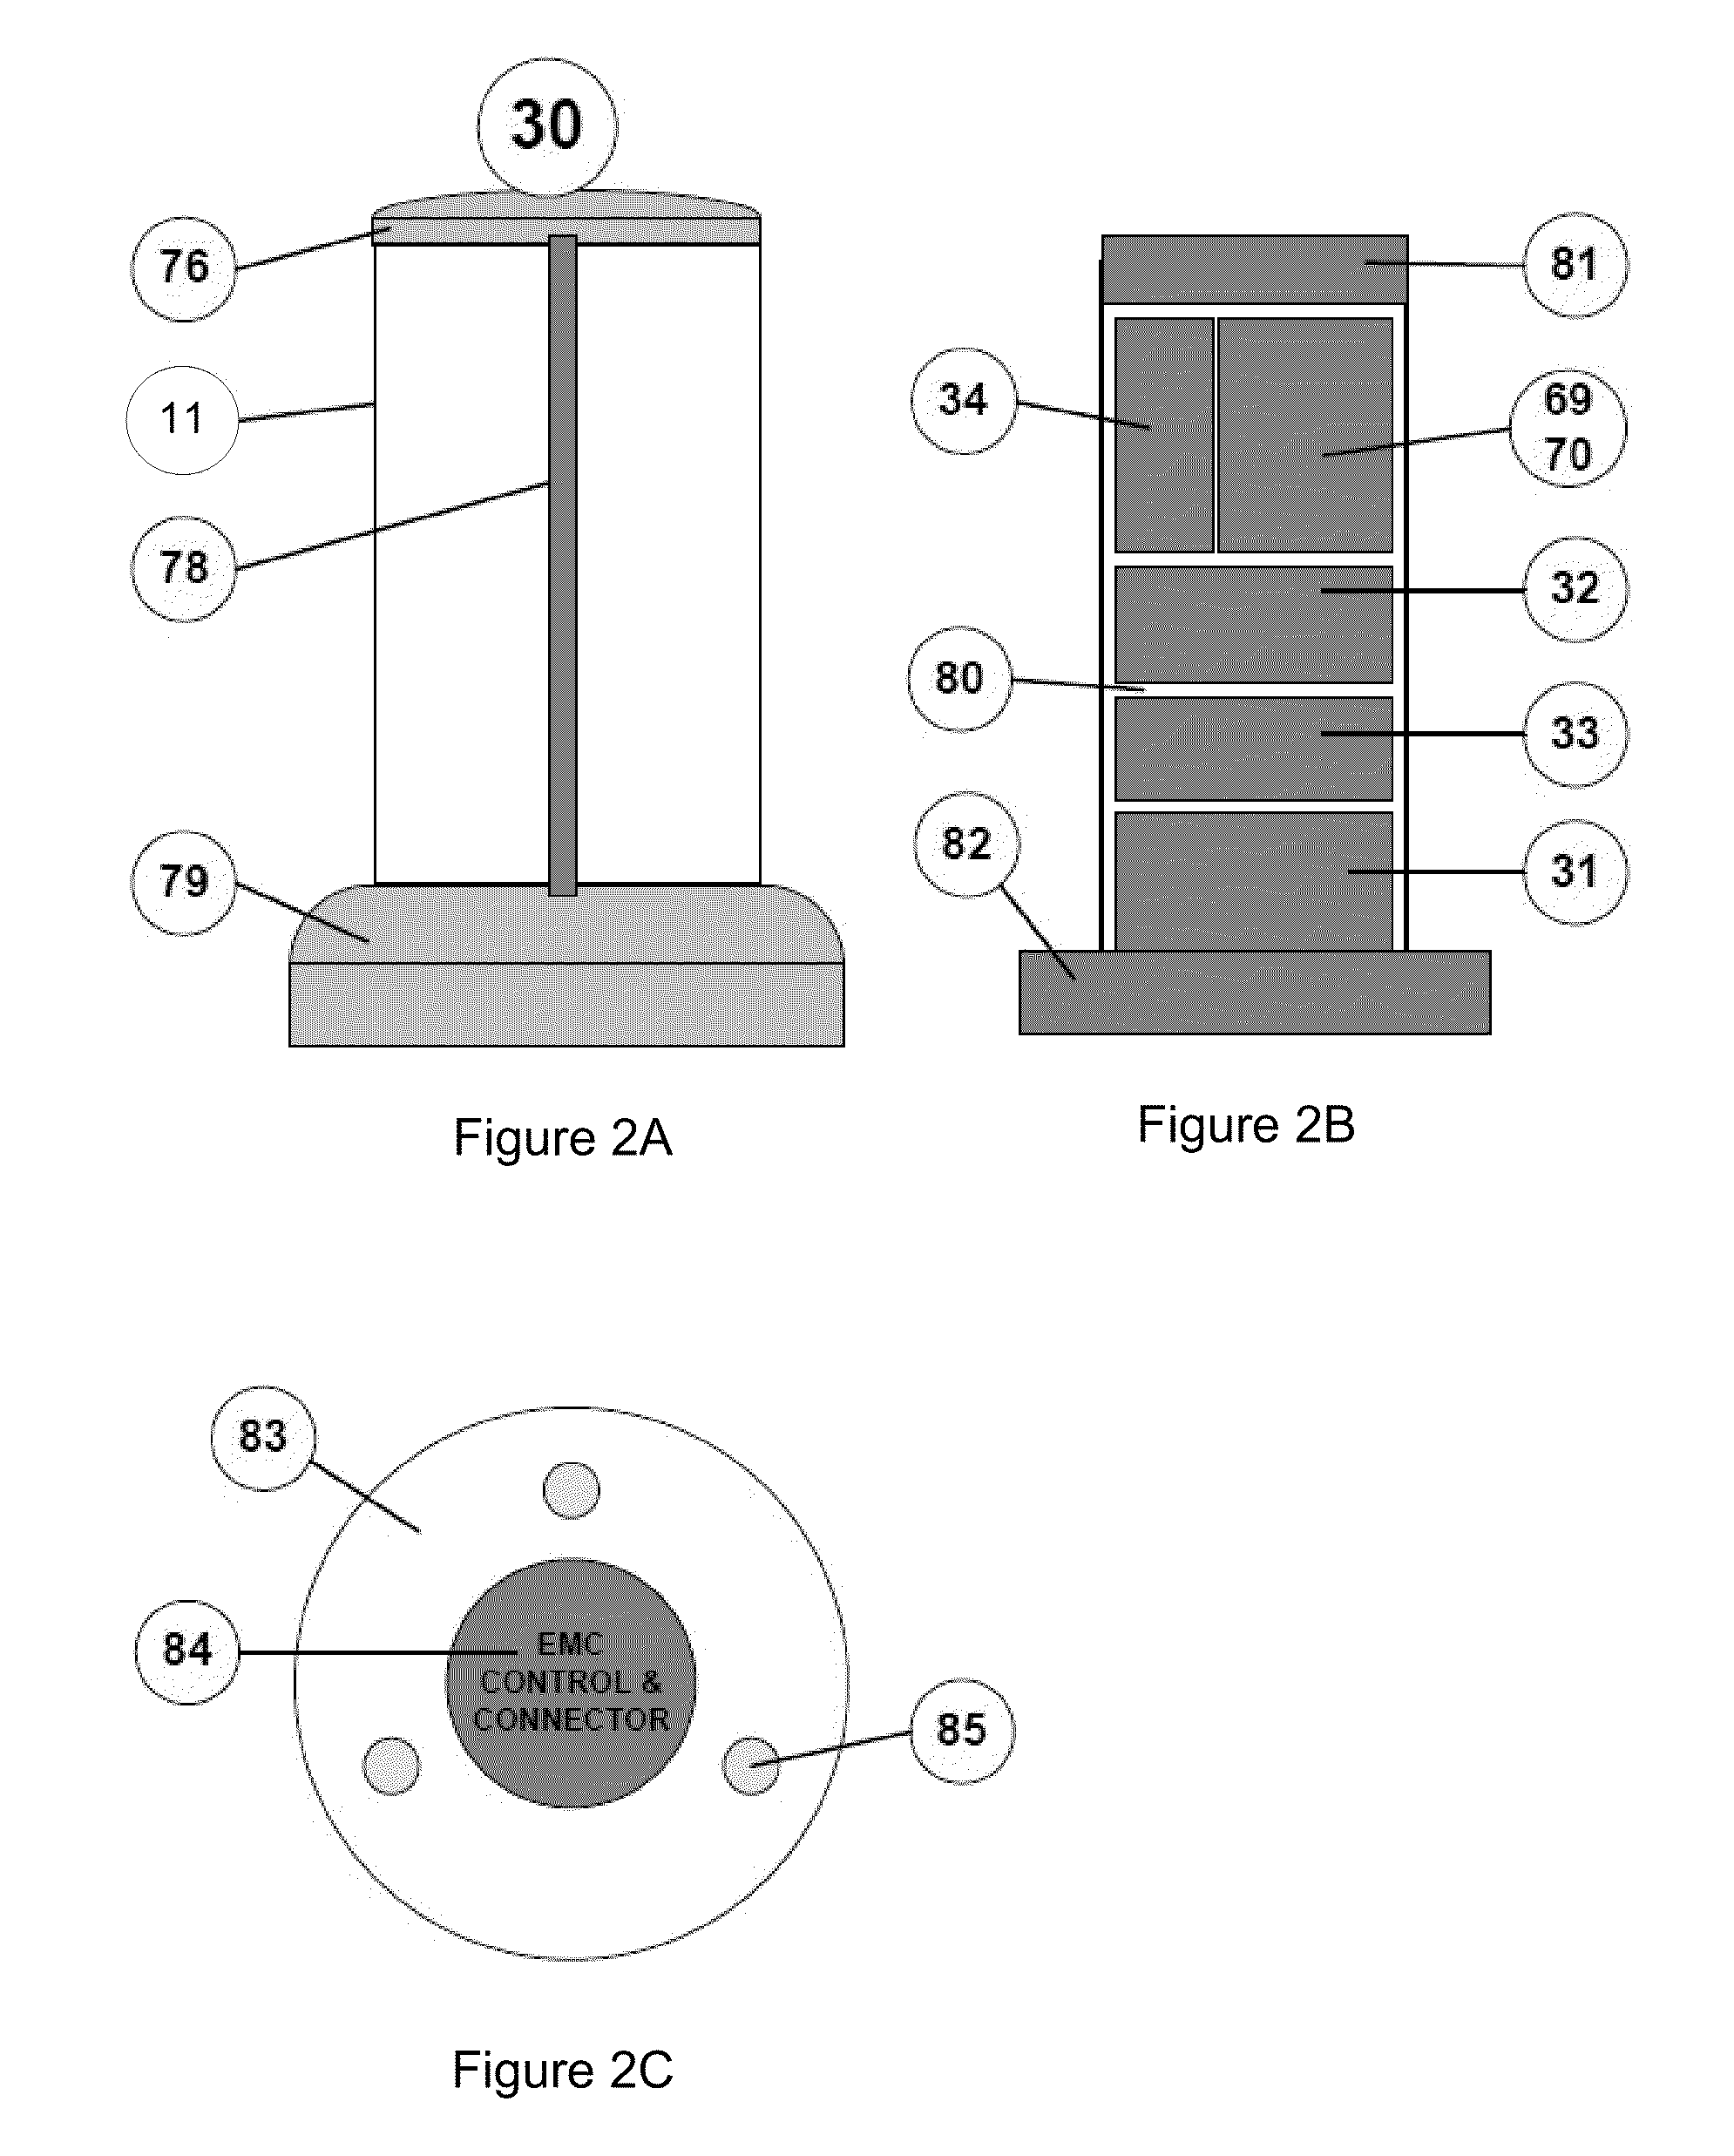 Gaming device and method for wireless gaming system providing non-intrusive processes